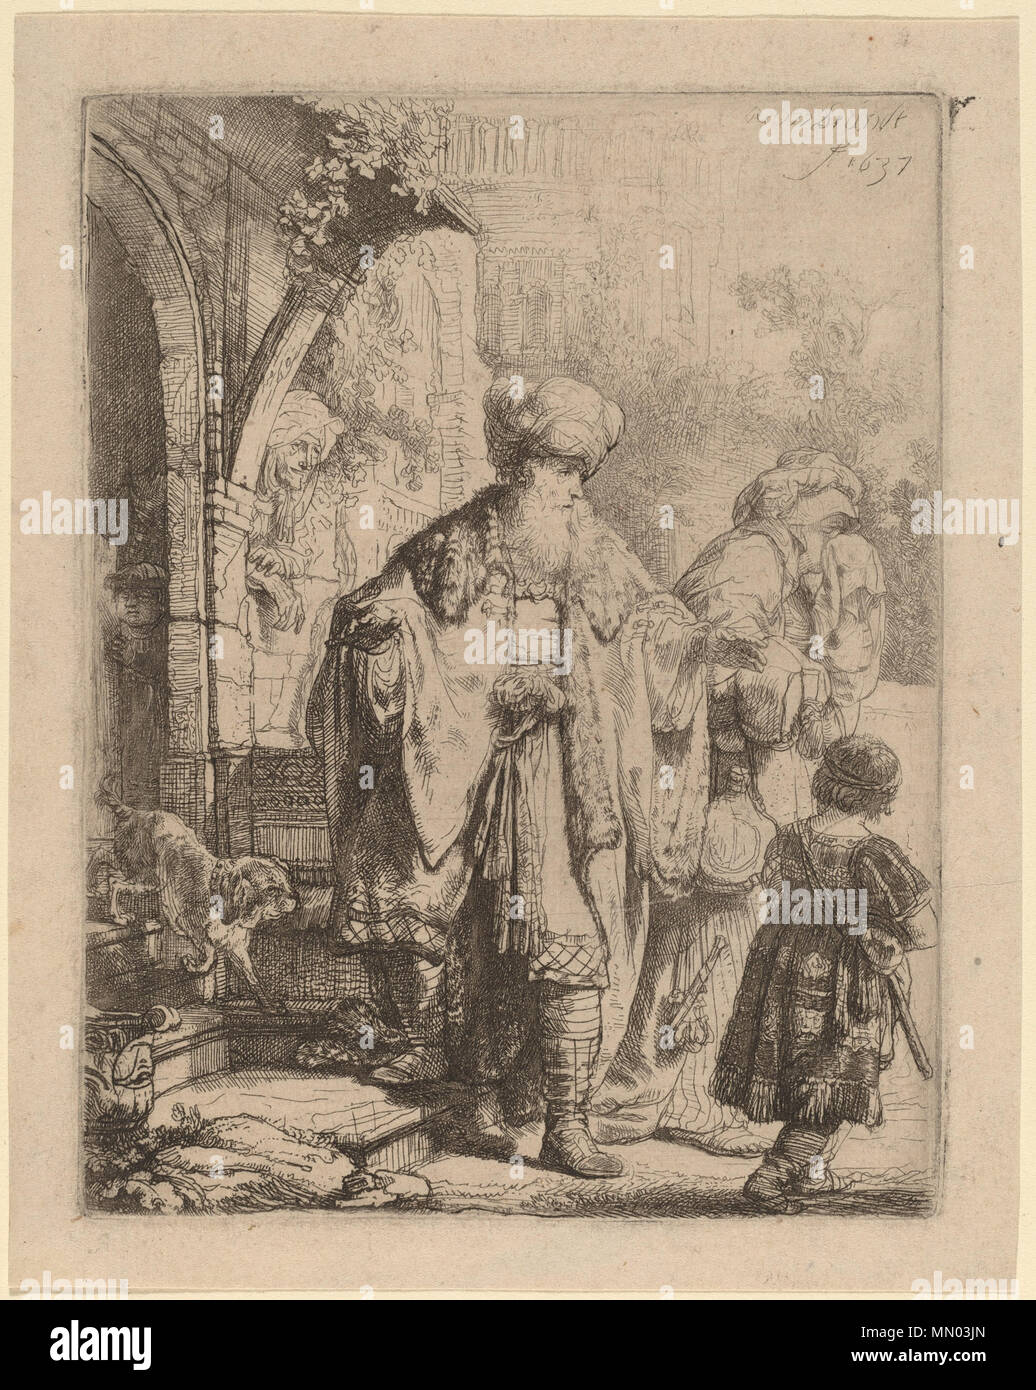 Print; etching with touches of drypoint; plate: 12.7 x 9.7 cm (5 x 3 13/16 in.) sheet: 14.3 x 11.4 cm (5 5/8 x 4 1/2 in.); Abraham Casting Out Hagar and Ishmael Stock Photo